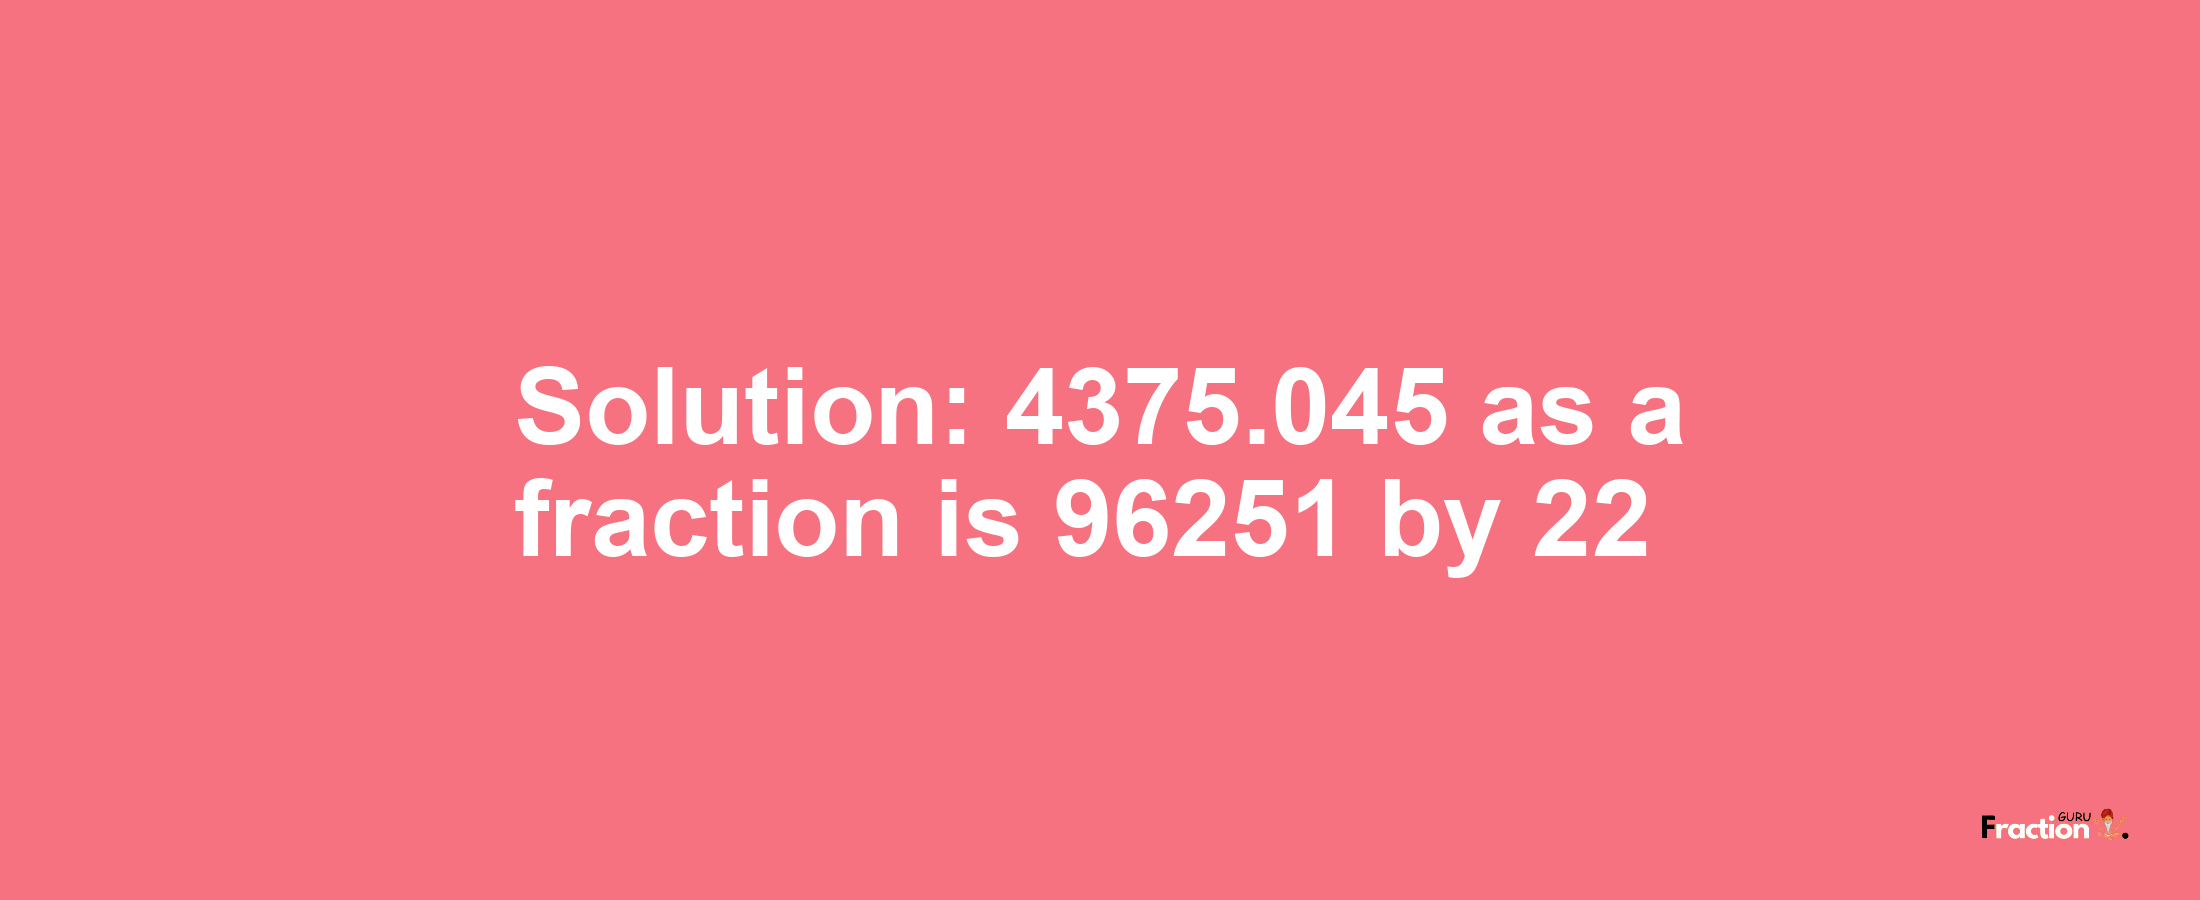 Solution:4375.045 as a fraction is 96251/22